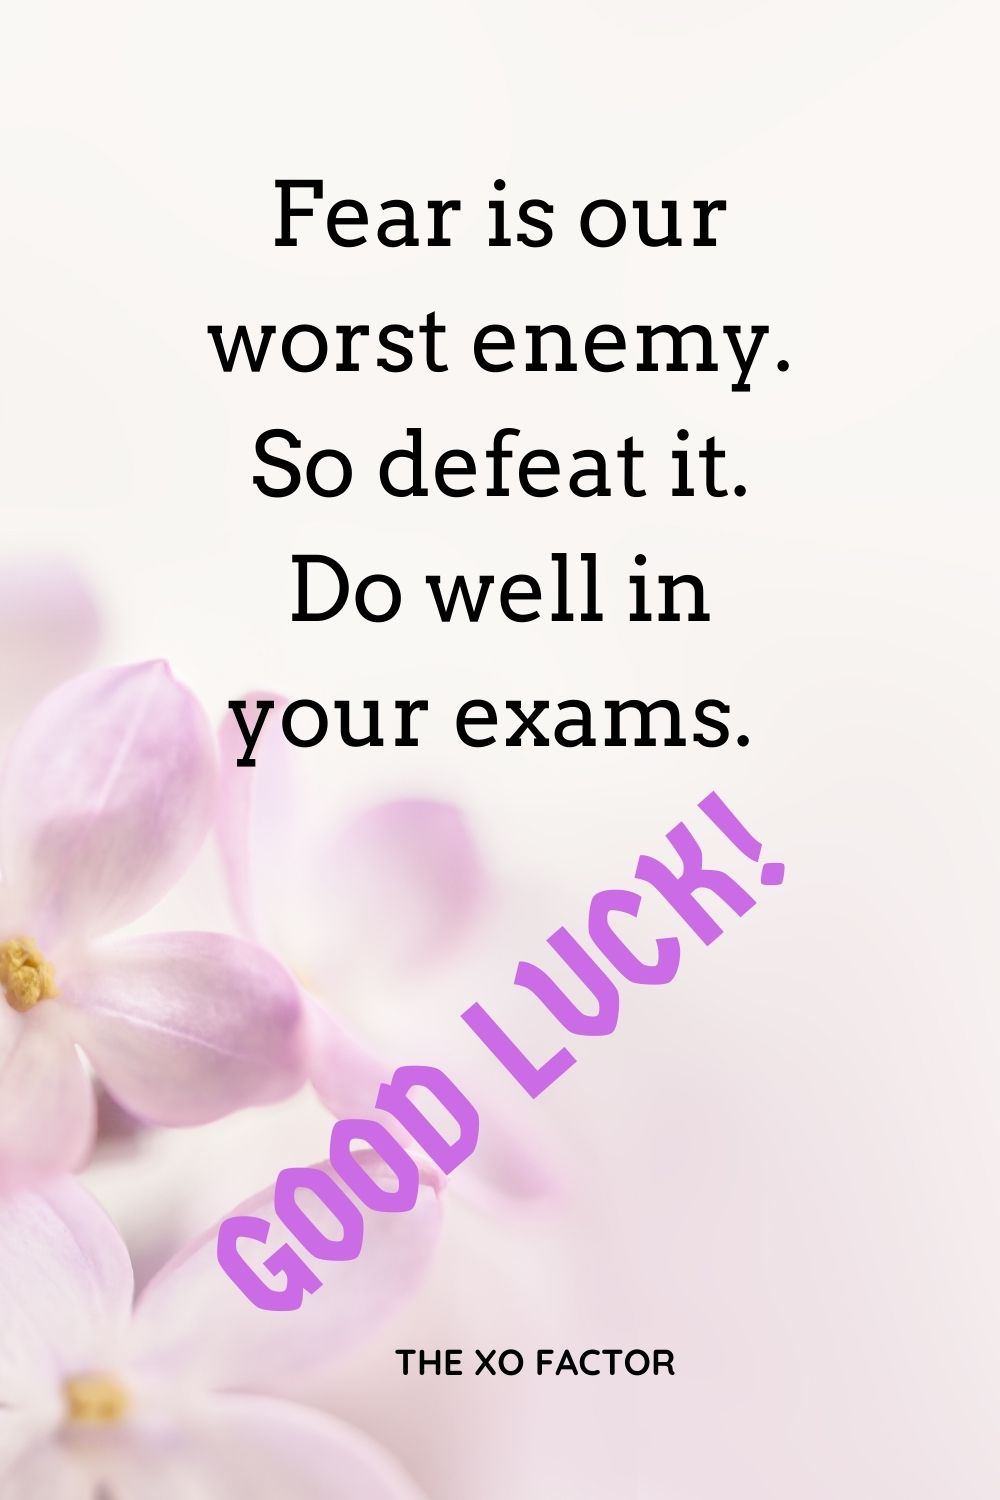 Fear is our worst enemy. So defeat it. Do well in your exams. Good luck!